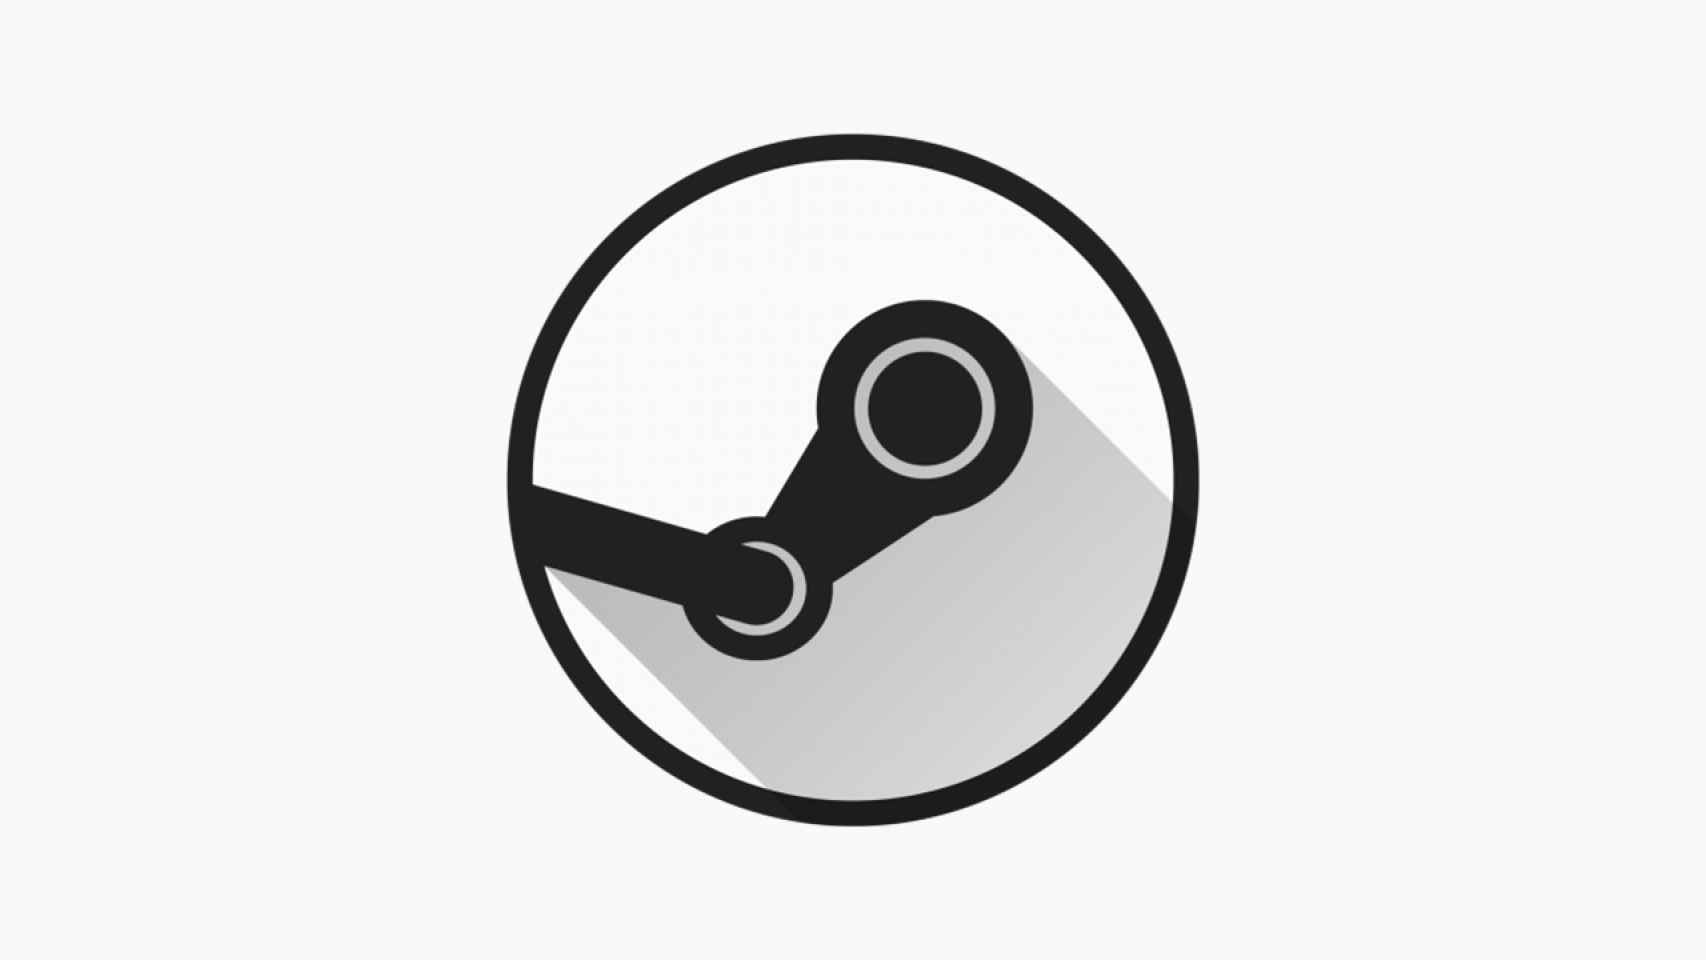 All steam icons gone фото 74